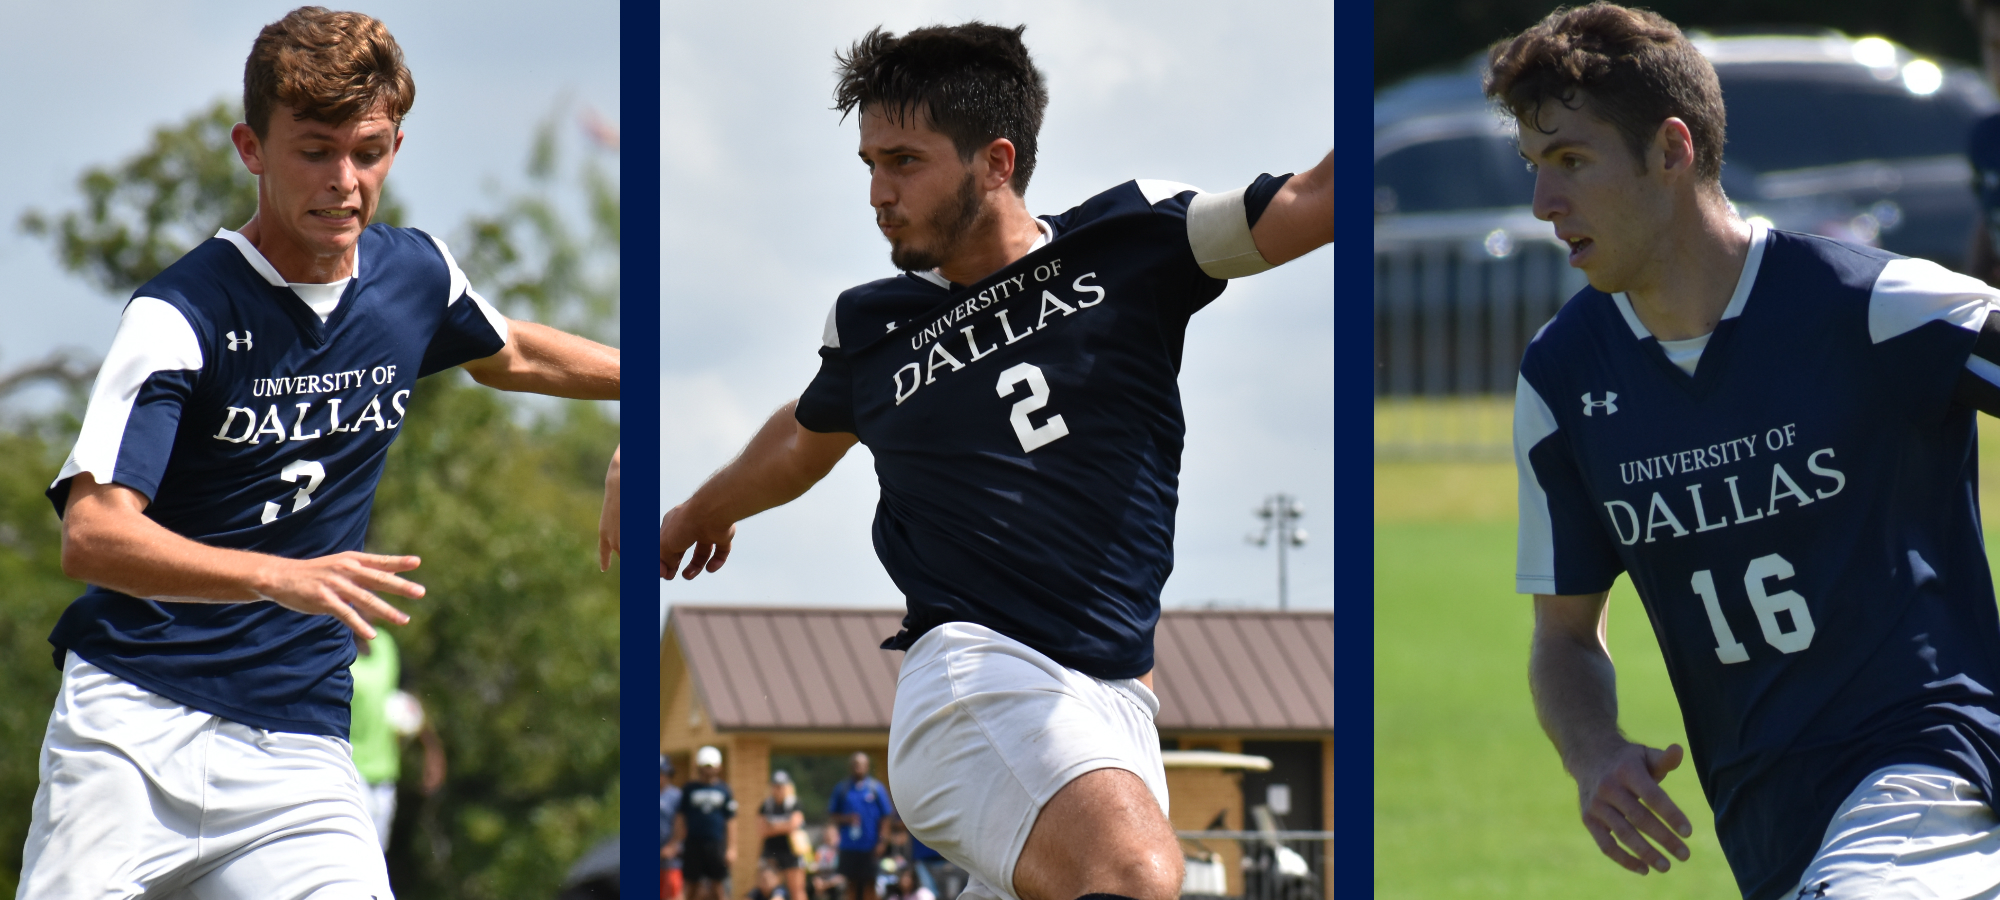 Taylor Headlines SCAC Men's Soccer All-Conference Awards